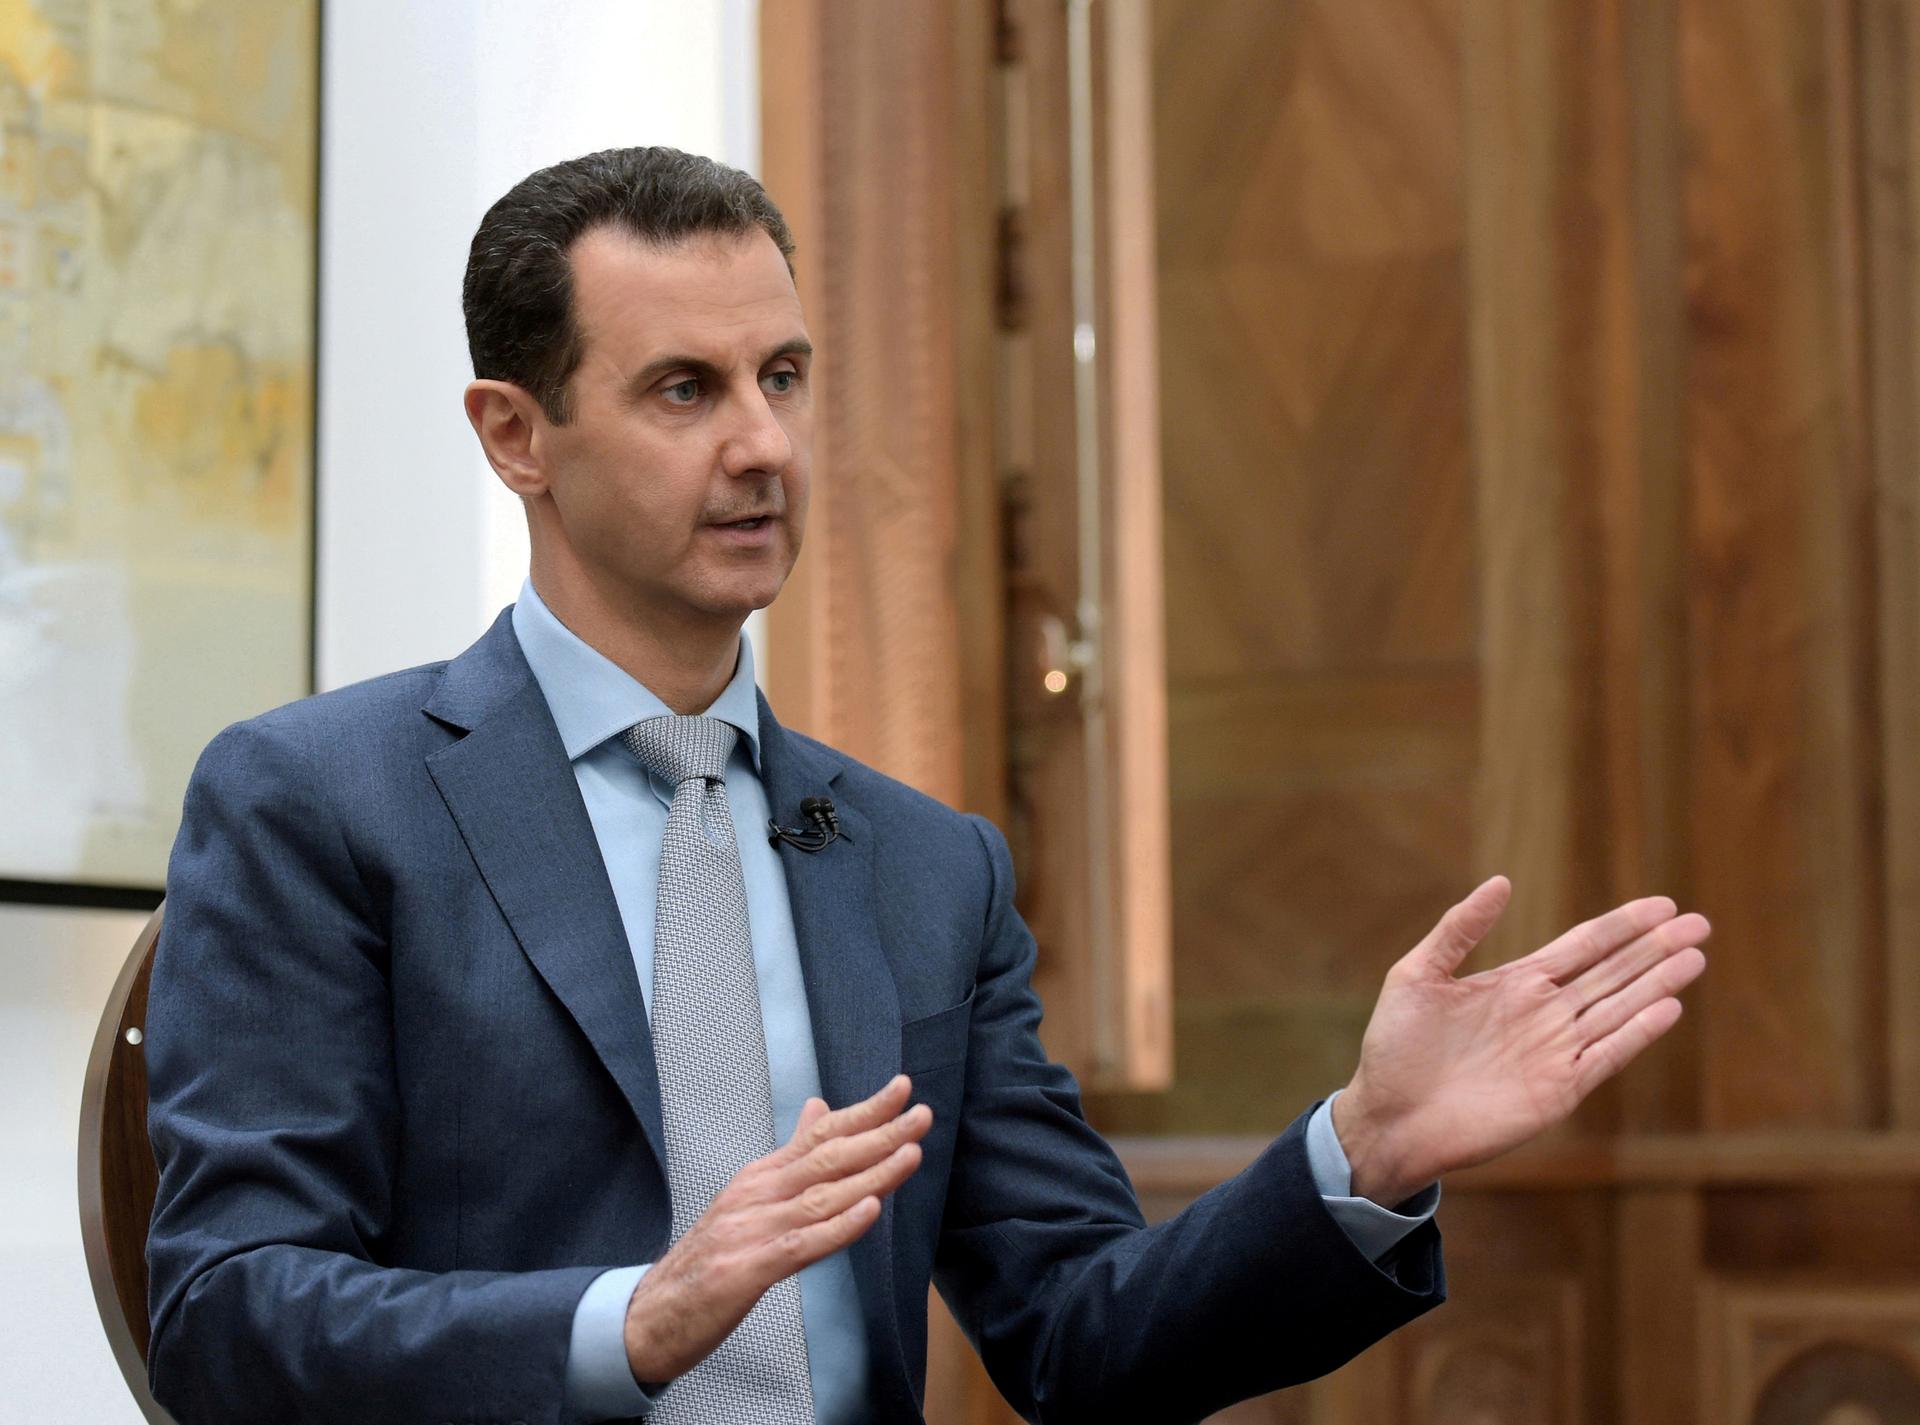 Syria's President Bashar al-Assad speaks during an interview with Yahoo News in this handout picture provided by SANA on February 10, 2017, Syria.